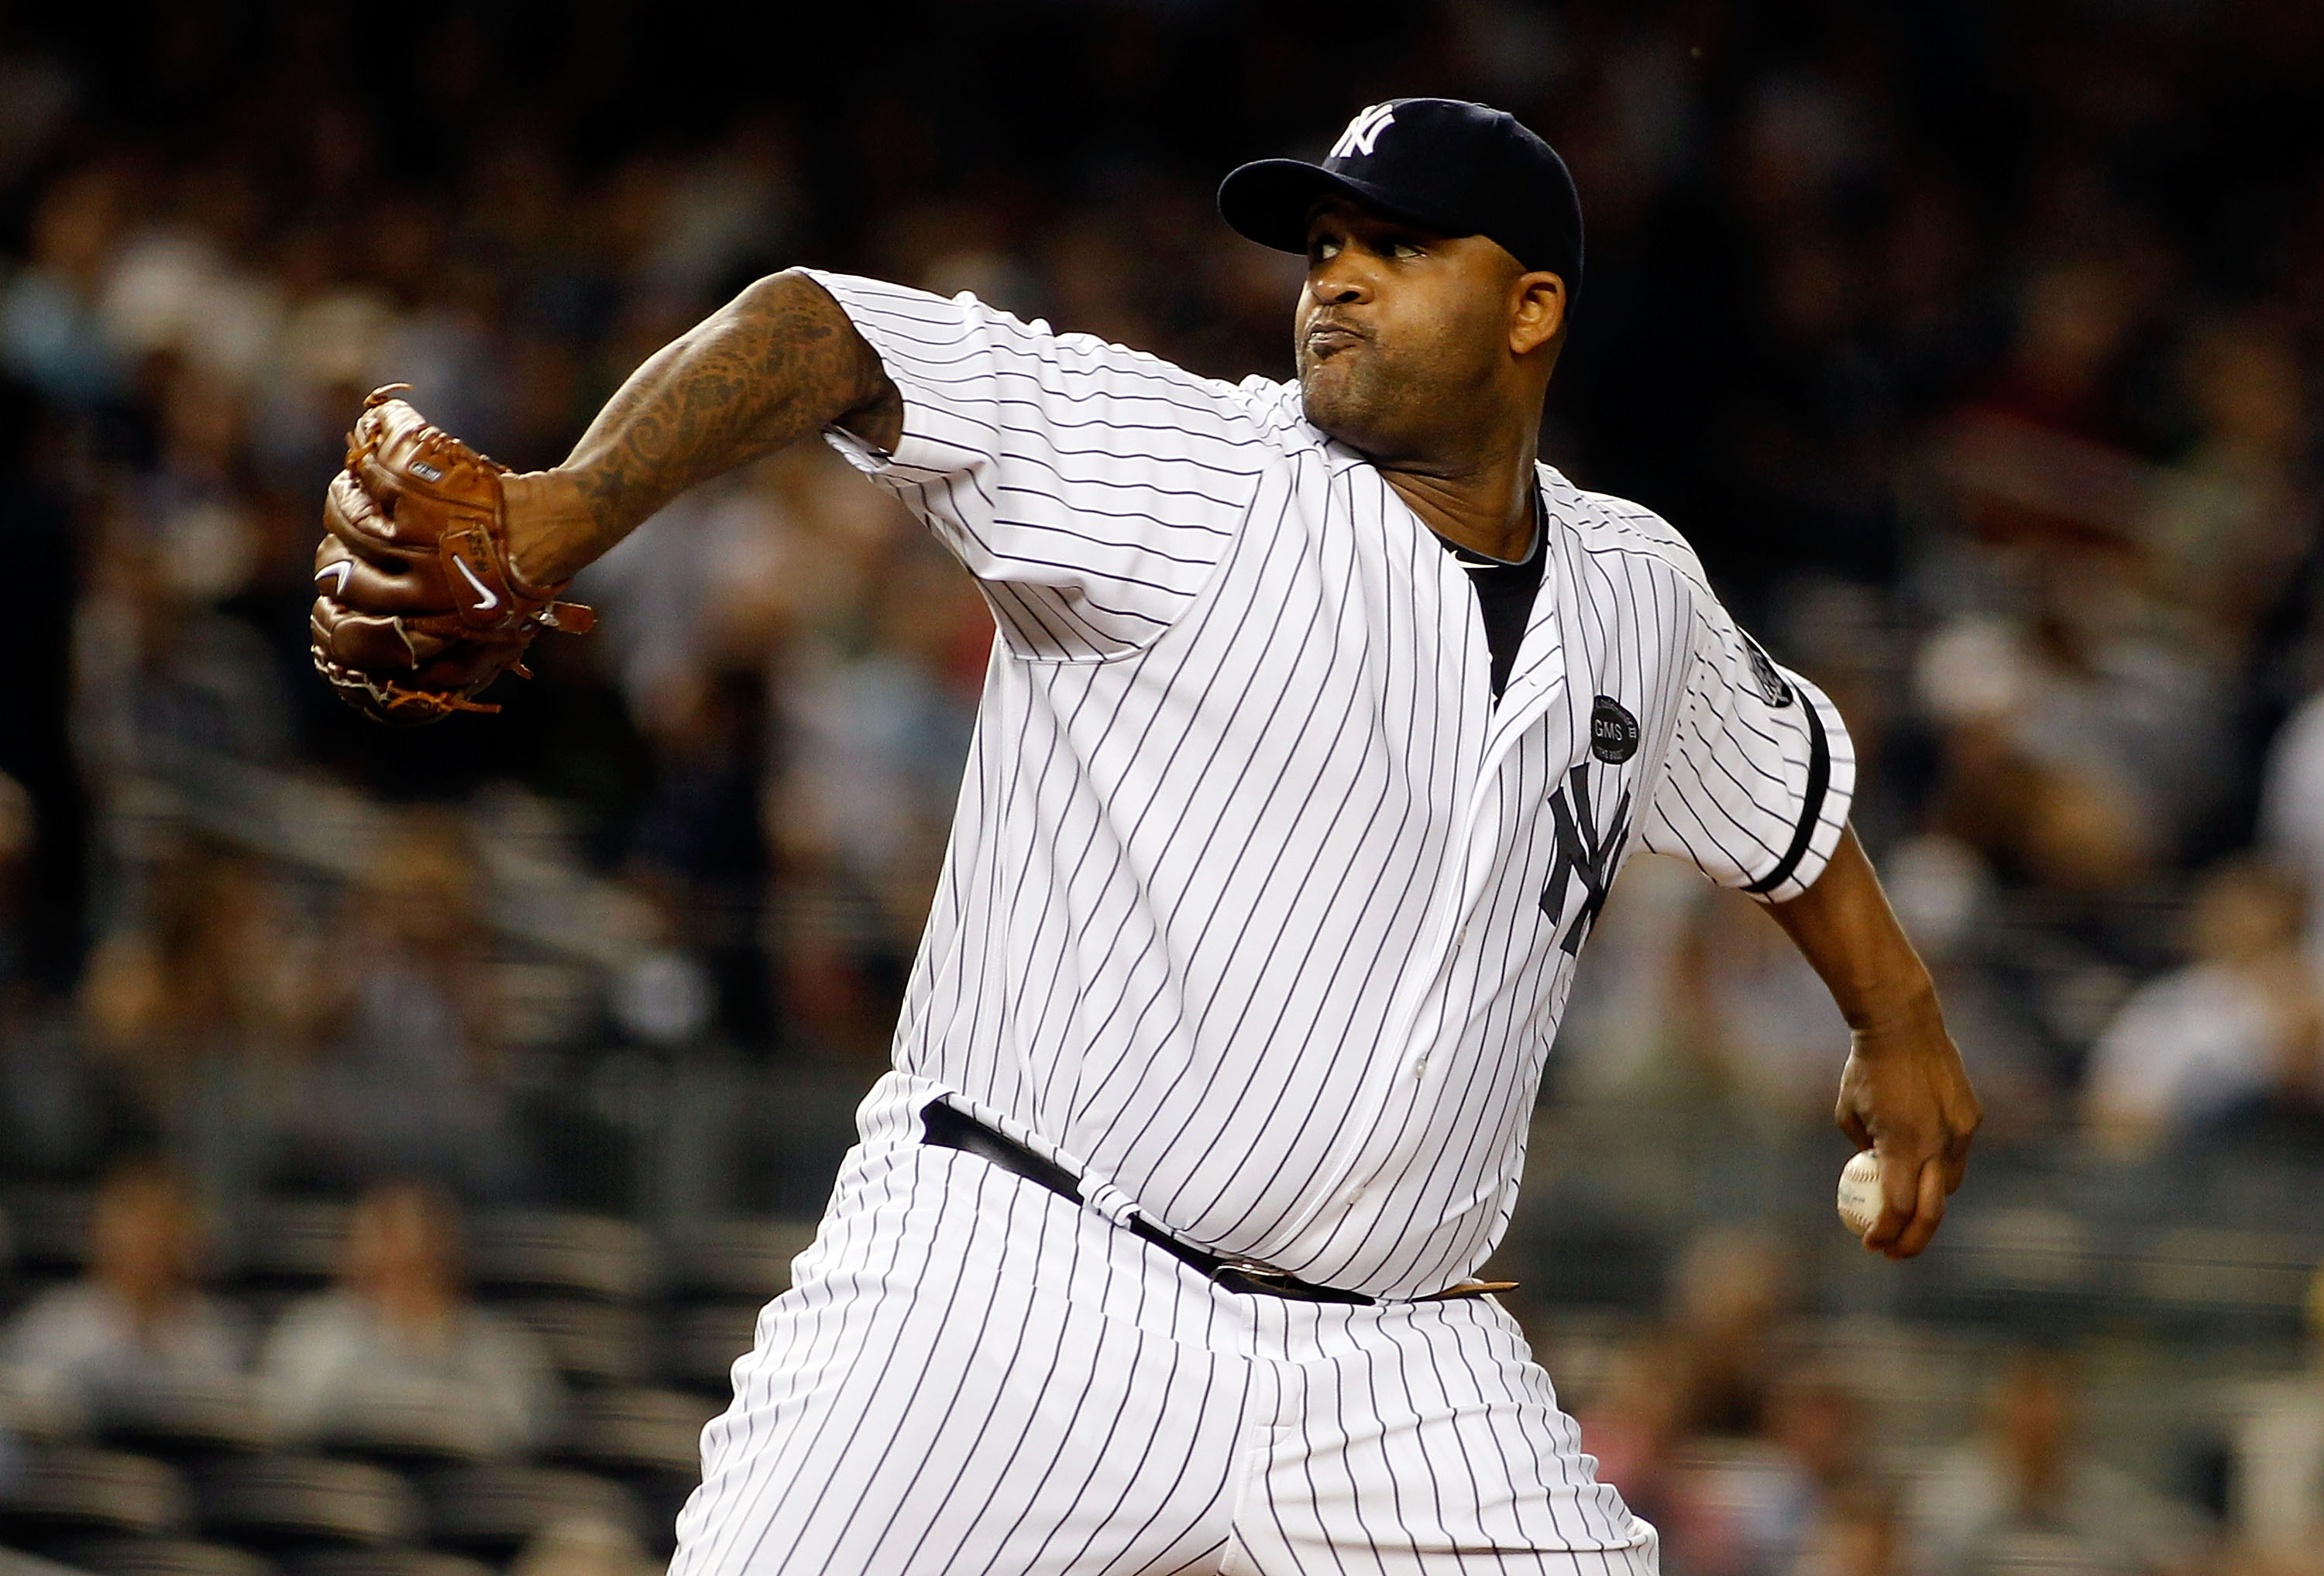 NEW YORK - SEPTEMBER 23:  CC Sabathia #52 of the New York Yankees delivers a pitch in the first-inning against the Tampa Bay Rays on September 23, 2010 at Yankee Stadium in the Bronx borough of New York City.  (Photo by Mike Stobe/Getty Images)